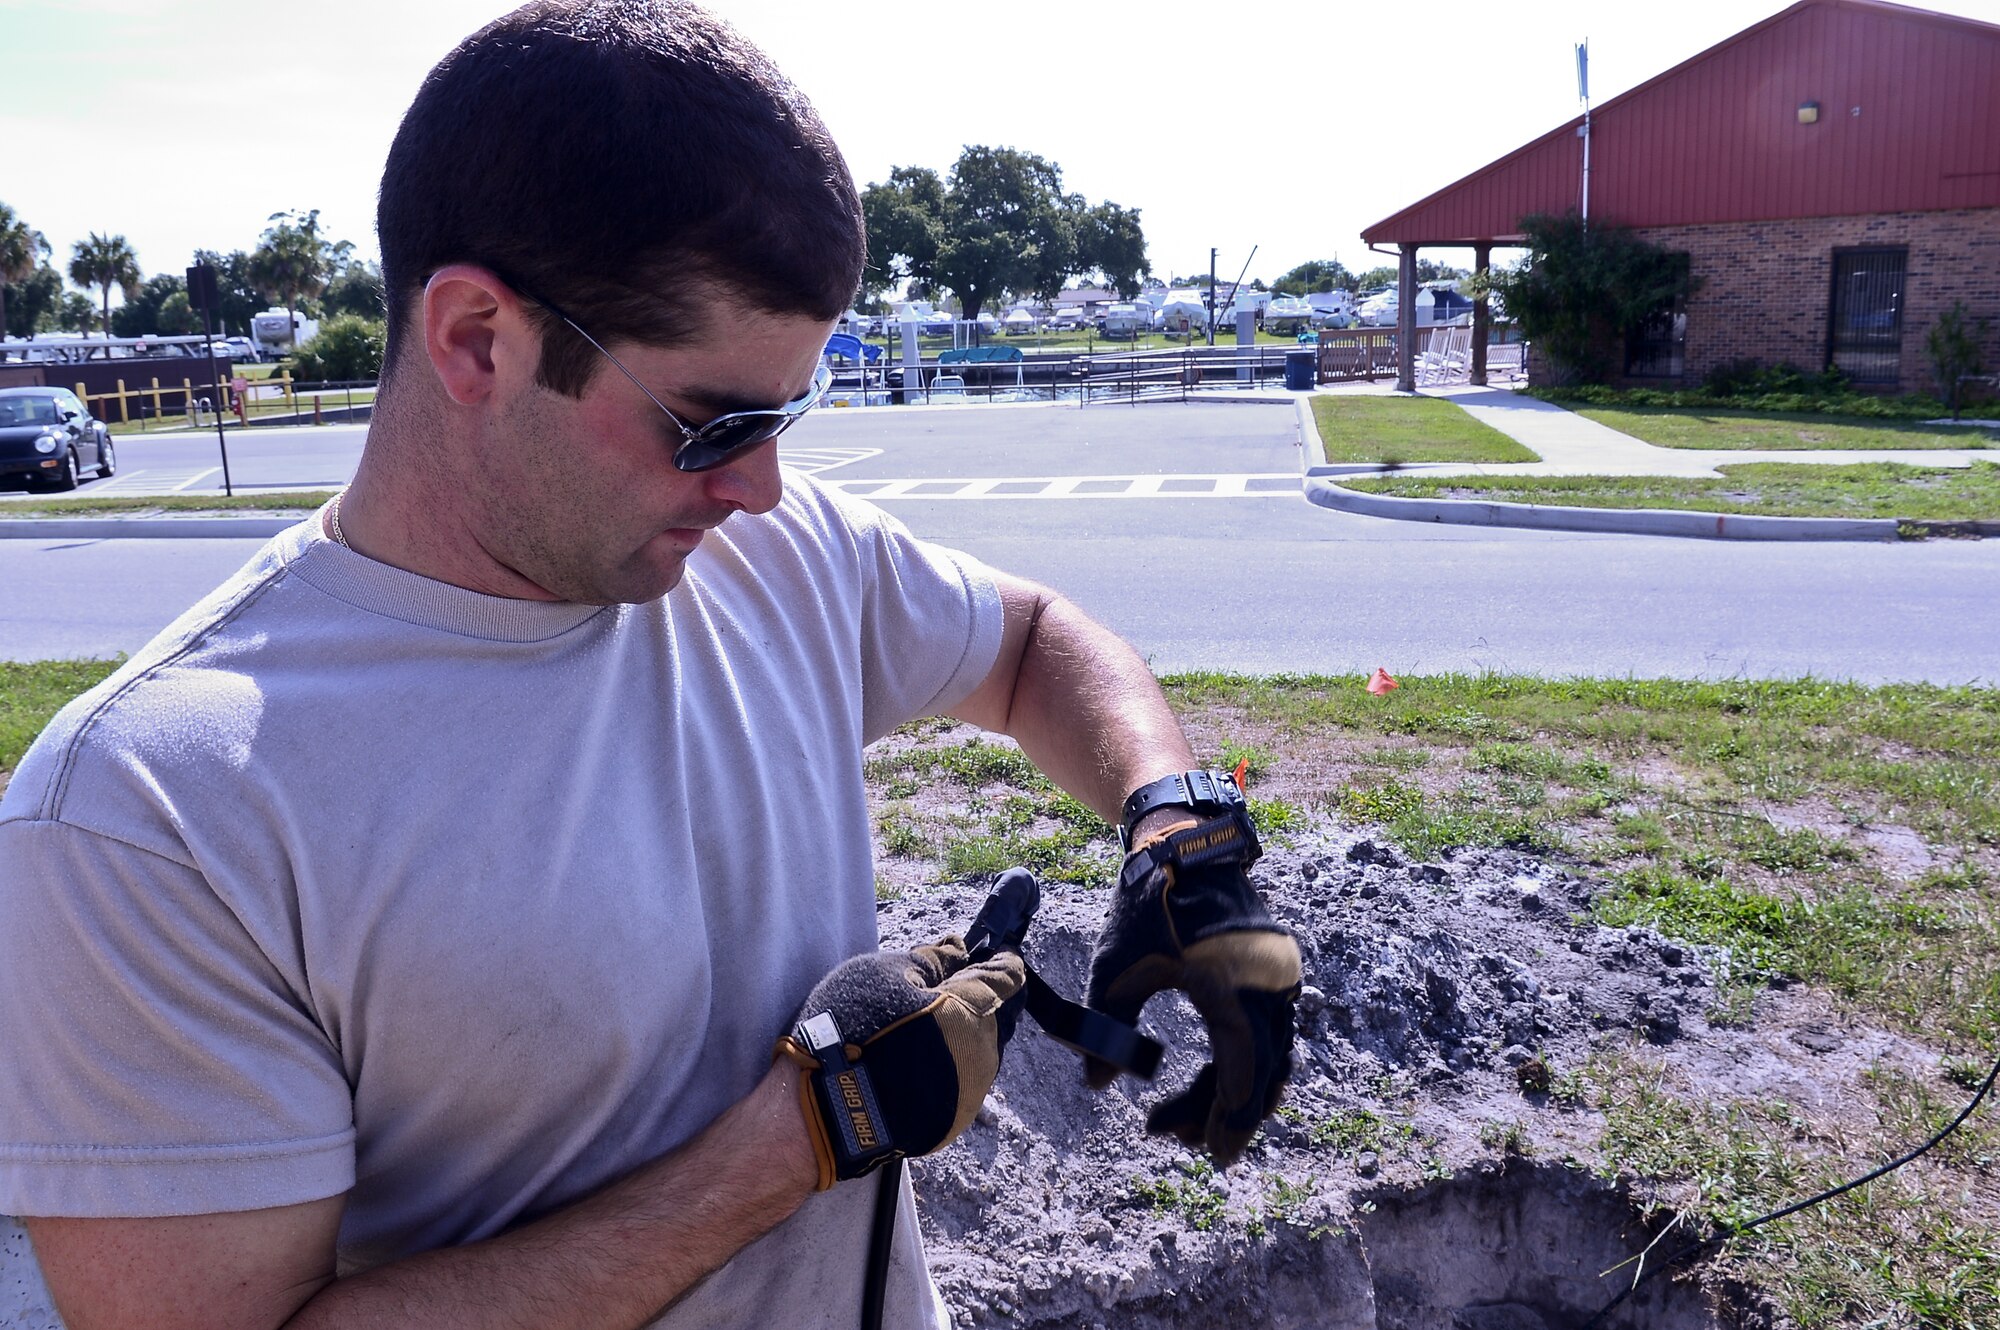 Senior Airman Joe Tartaglia, 6th Communications Squadron cable and antenna systems maintainer, wraps tape around wire at MacDill Air Force Base, Fla., July 11, 2014. Tartaglia and the other cable dogs, as they refer to themselves, laid the wire to install an emergency beach phone near the Marina. (U.S. Air Force photo by Senior Airman Vernon L. Fowler Jr./Released)